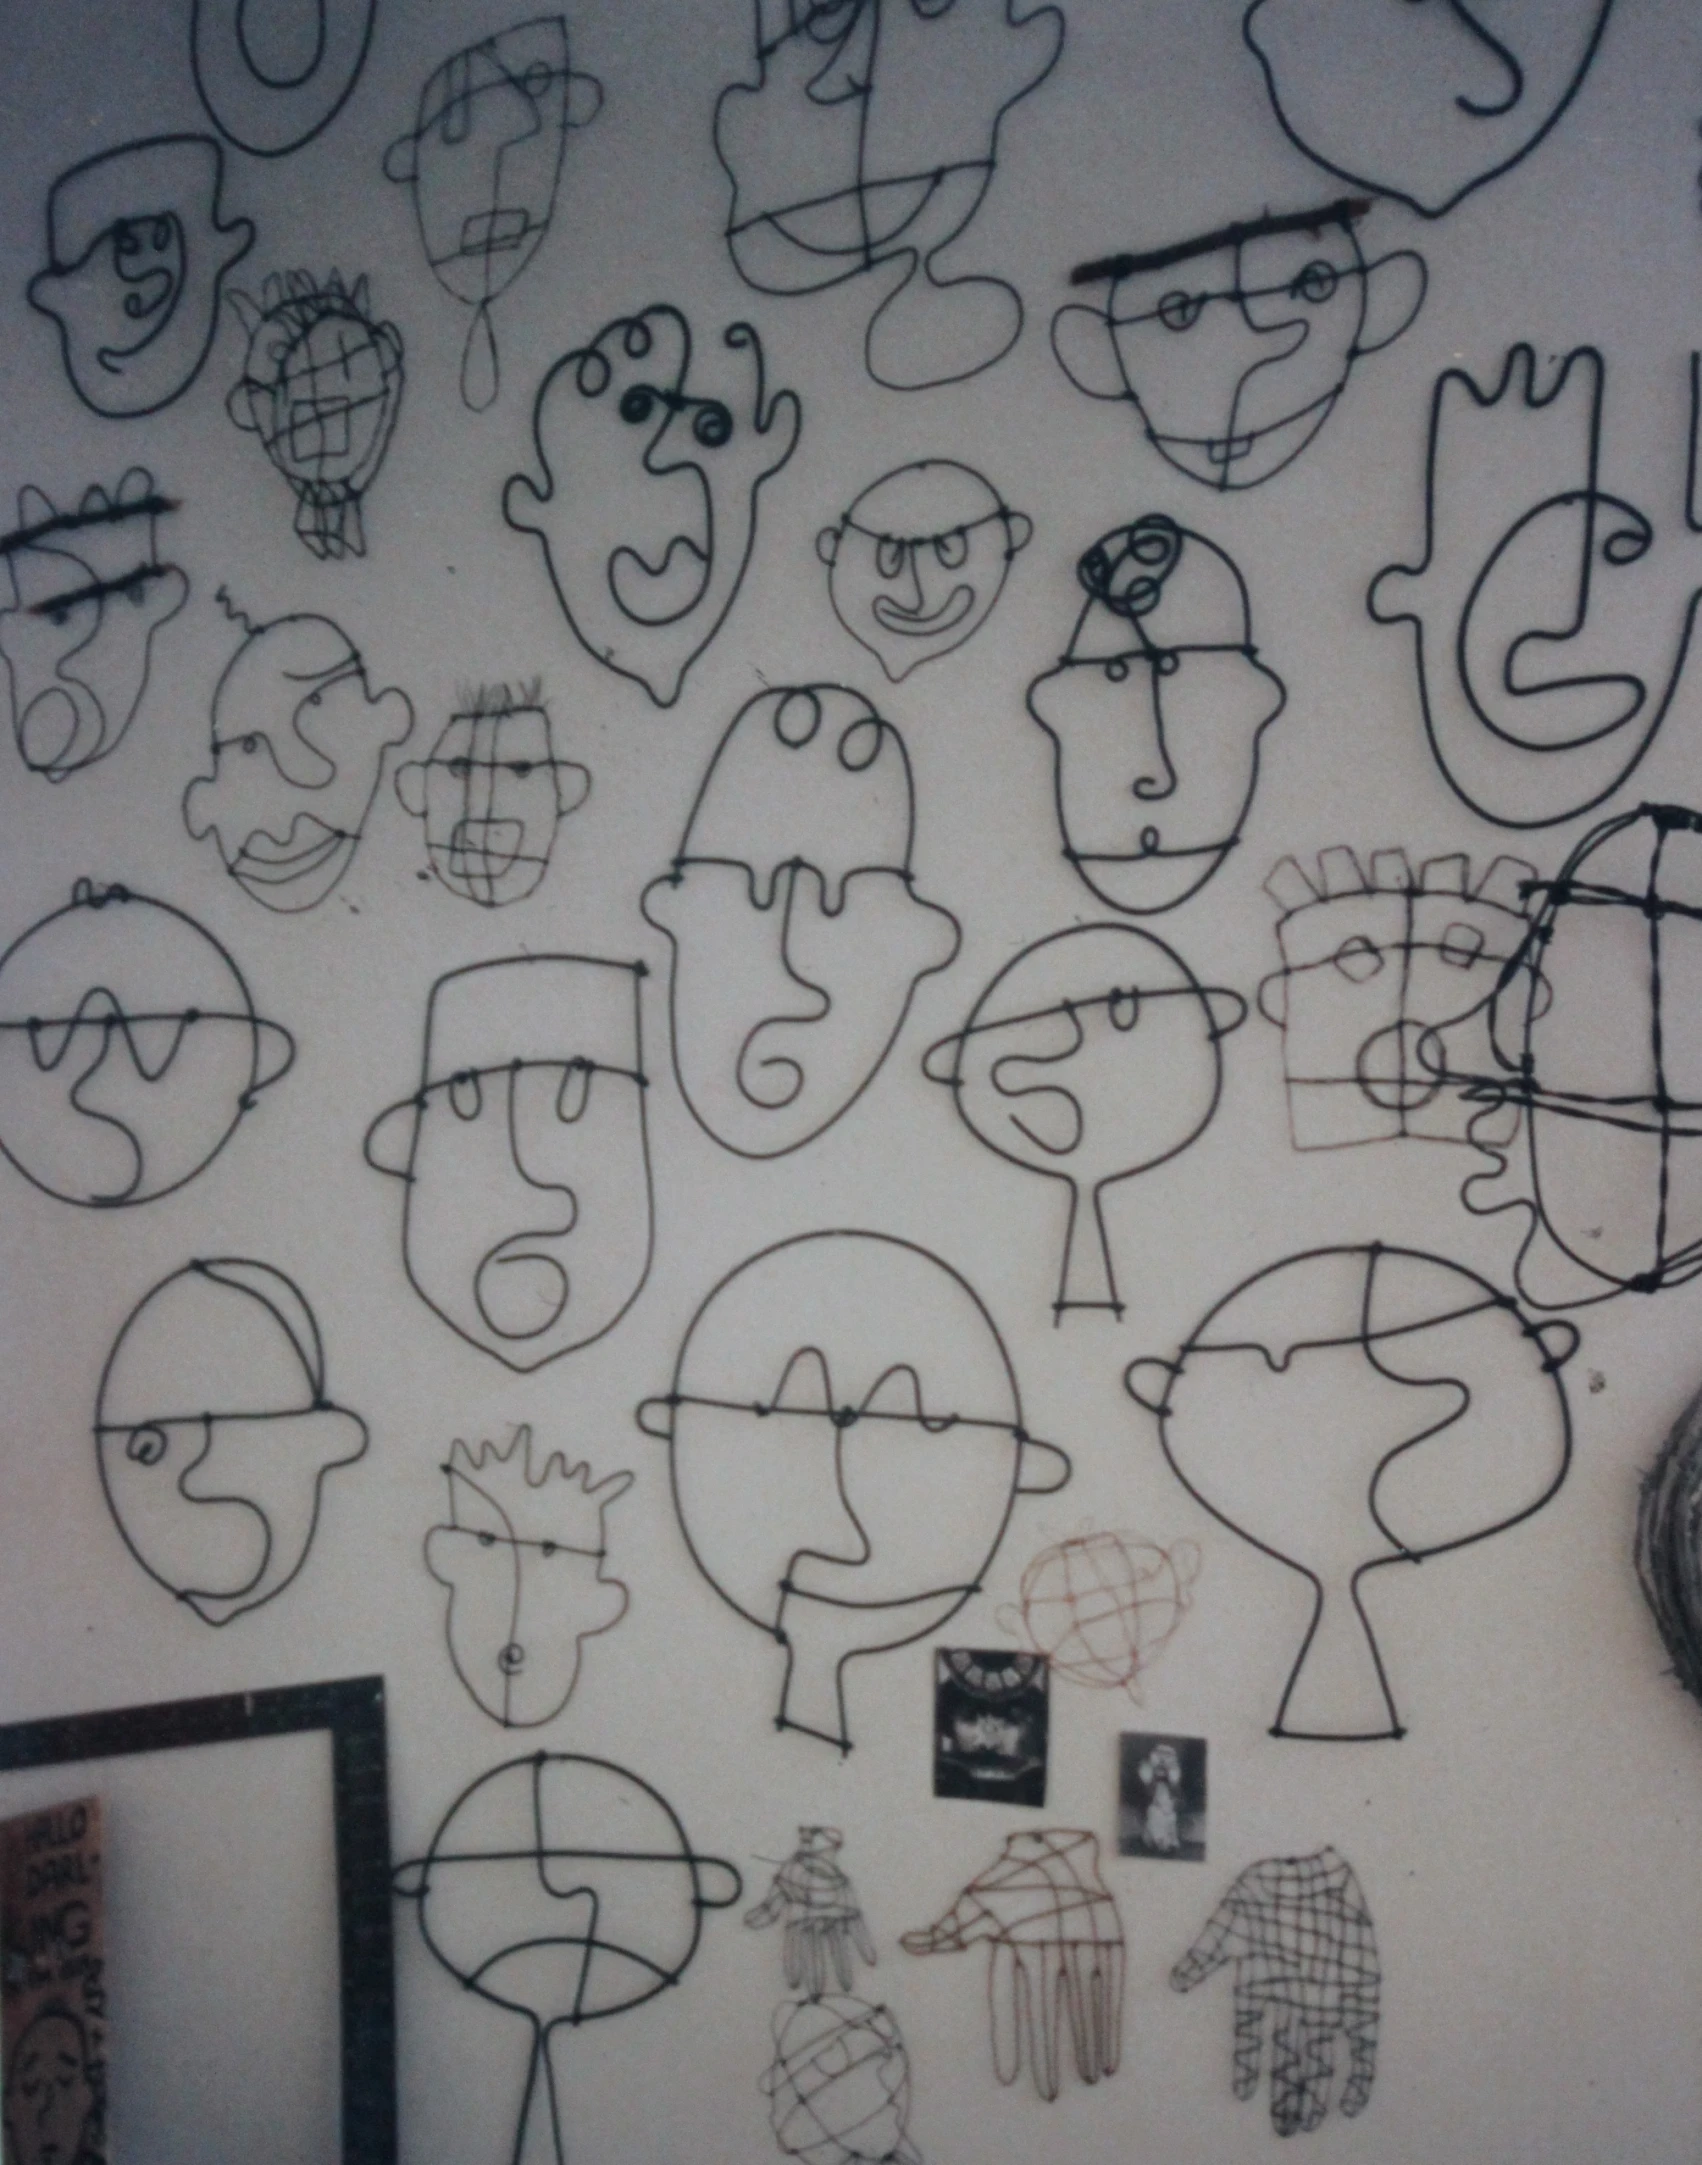 there are many drawing faces hanging on the wall